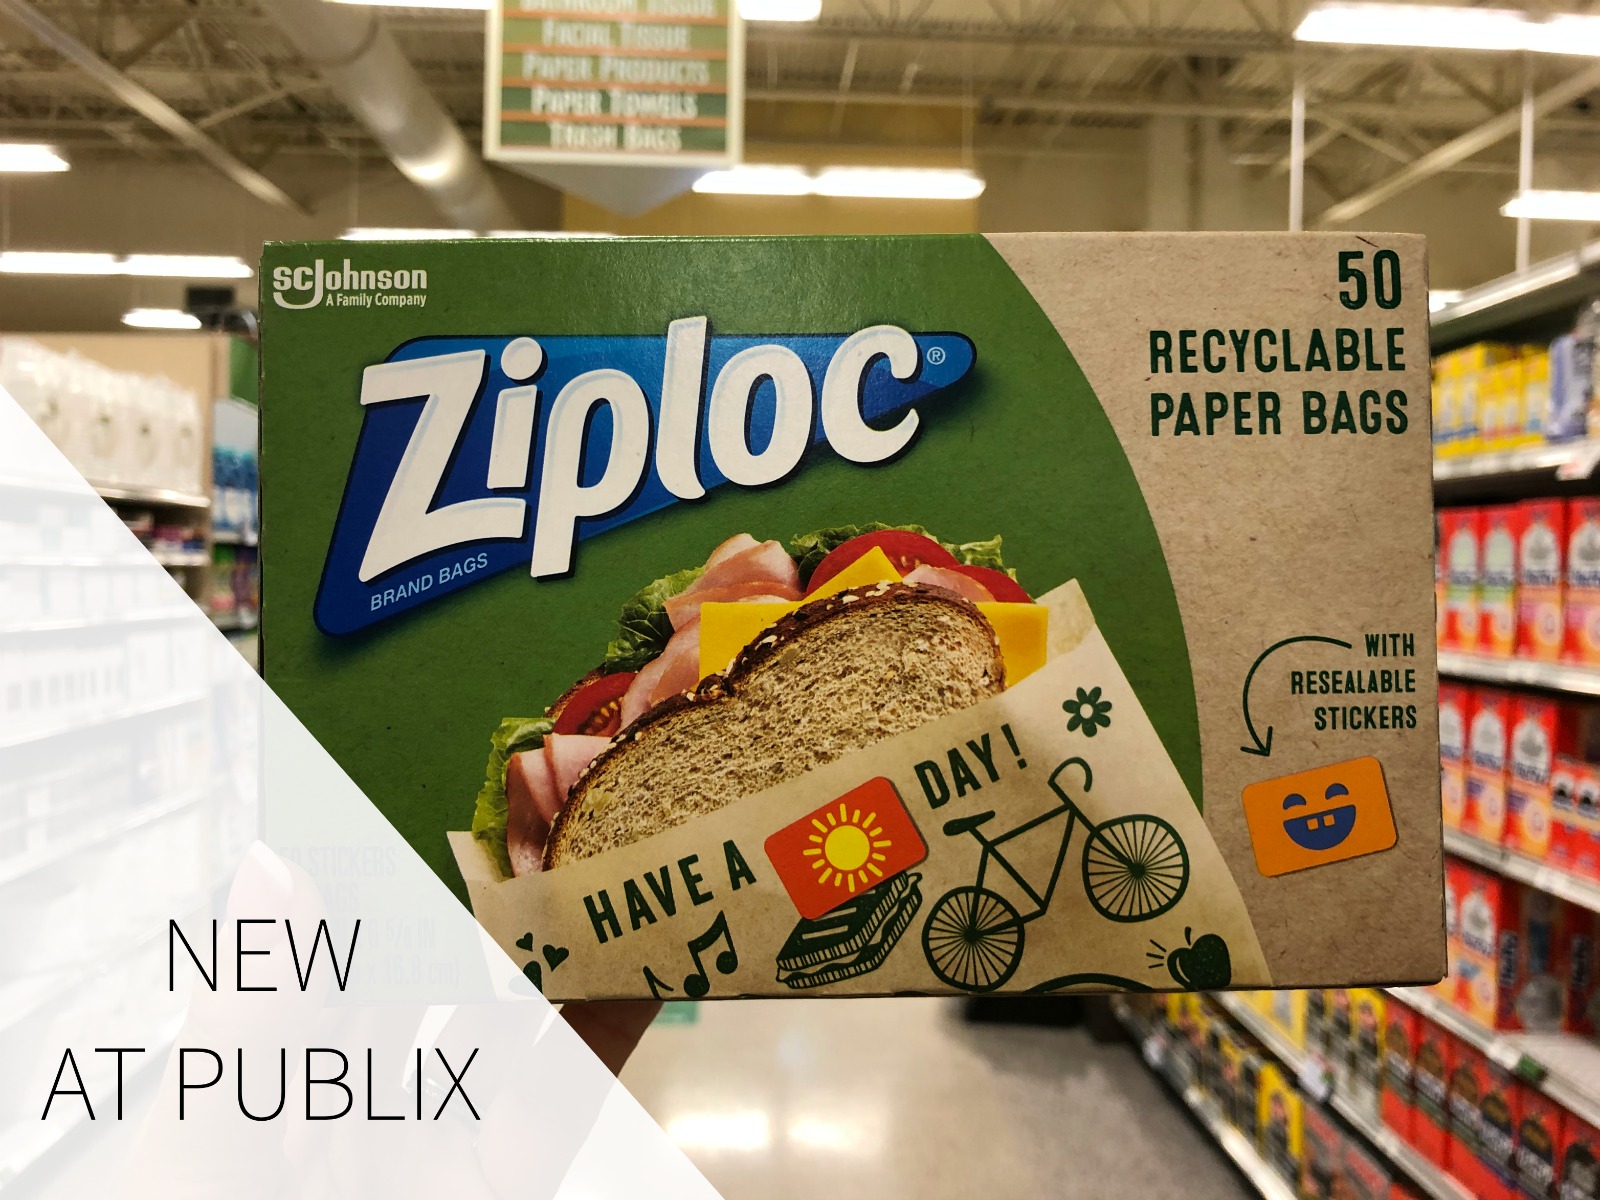 Look For New Ziploc® Paper Bags At Publix – Recyclable, Resealable & Reusable Bags With Fun Designs!